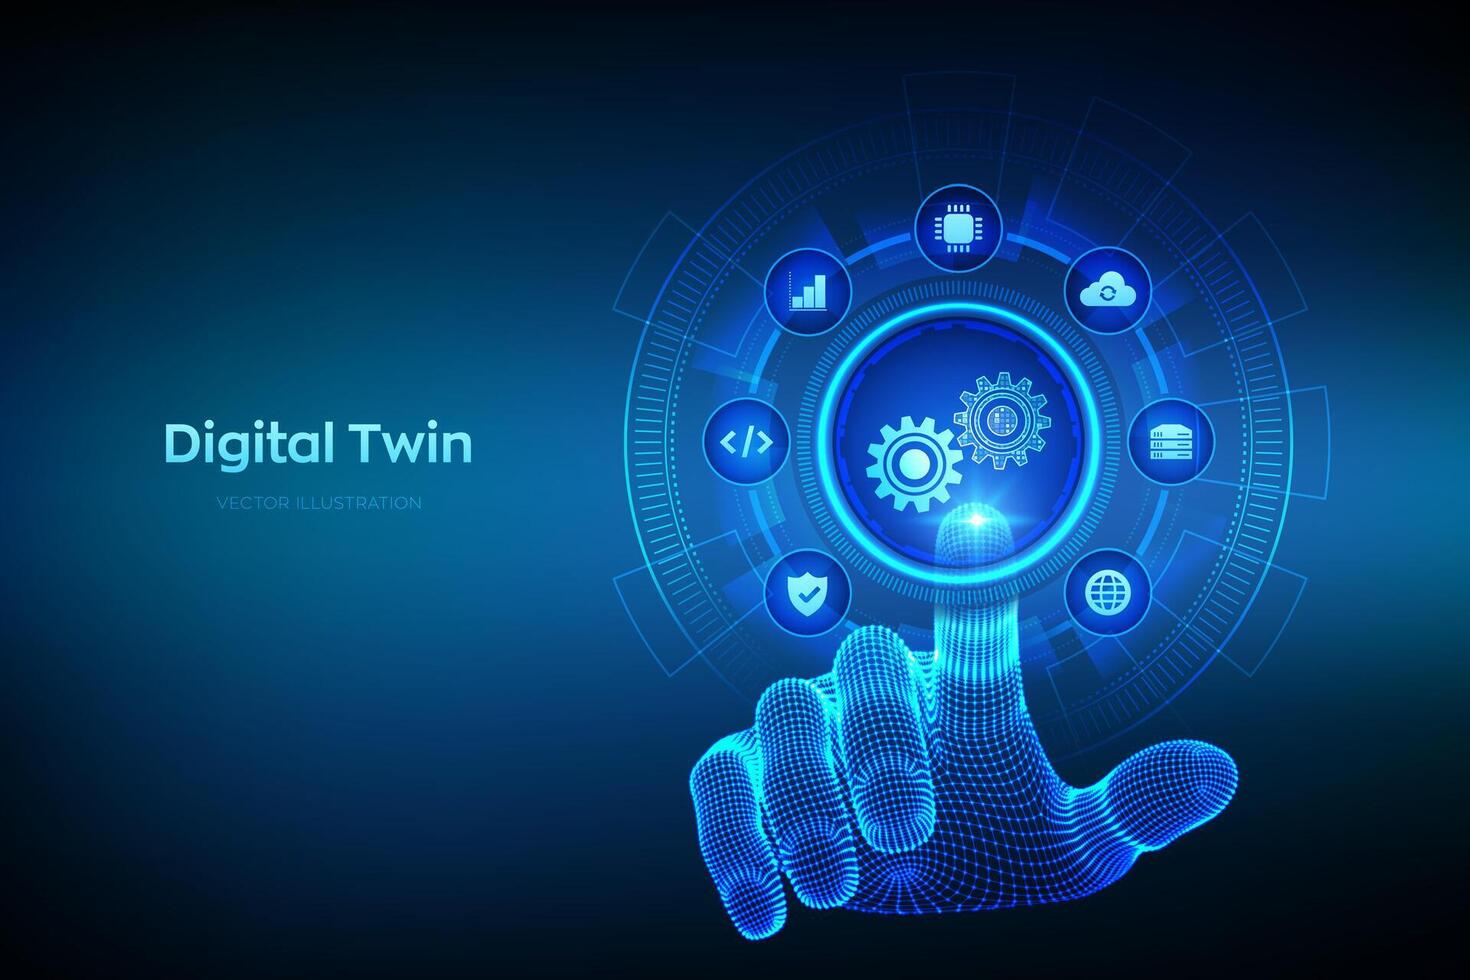 Digital twin business and industrial process modelling technology concept on virtual screen. Innovation and optimisation. Wireframe hand touching digital interface. Vector illustration.